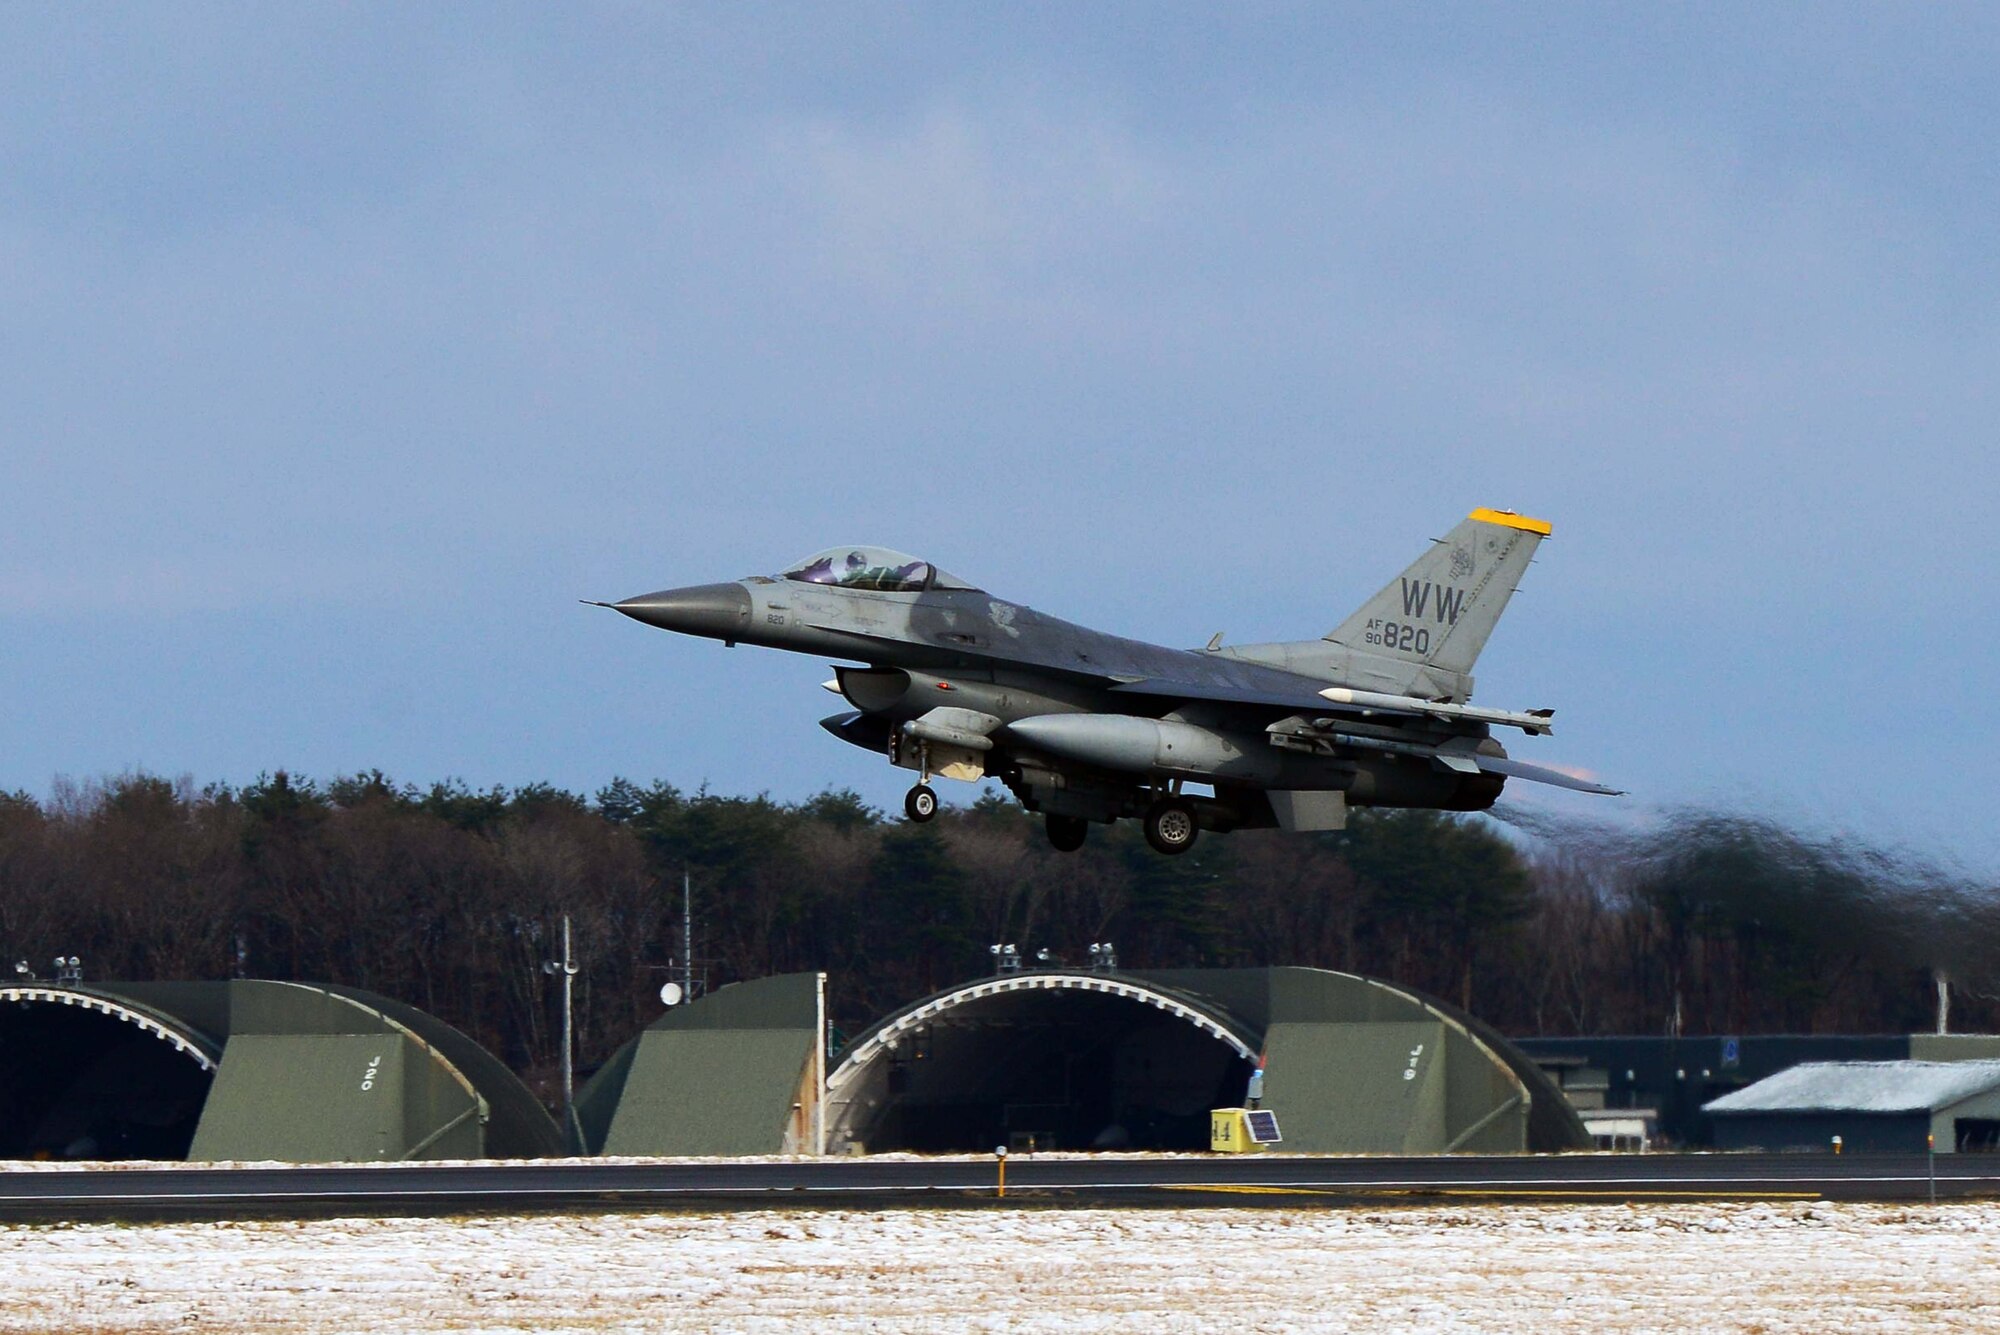 An F-16 Fighting Falcon assigned to the 35th Fighter Wing departs Dec. 4, 2014, from Misawa Air Base, Japan. Numerous F-16s left Misawa for Osan AB, South Korea, in support of Beverly Sunrise 15-1, an exercise that deployed more than 200 Airmen and incorporated five Pacific Air Forces bases. (U.S. Air Force photo/Staff Sgt. Derek VanHorn)